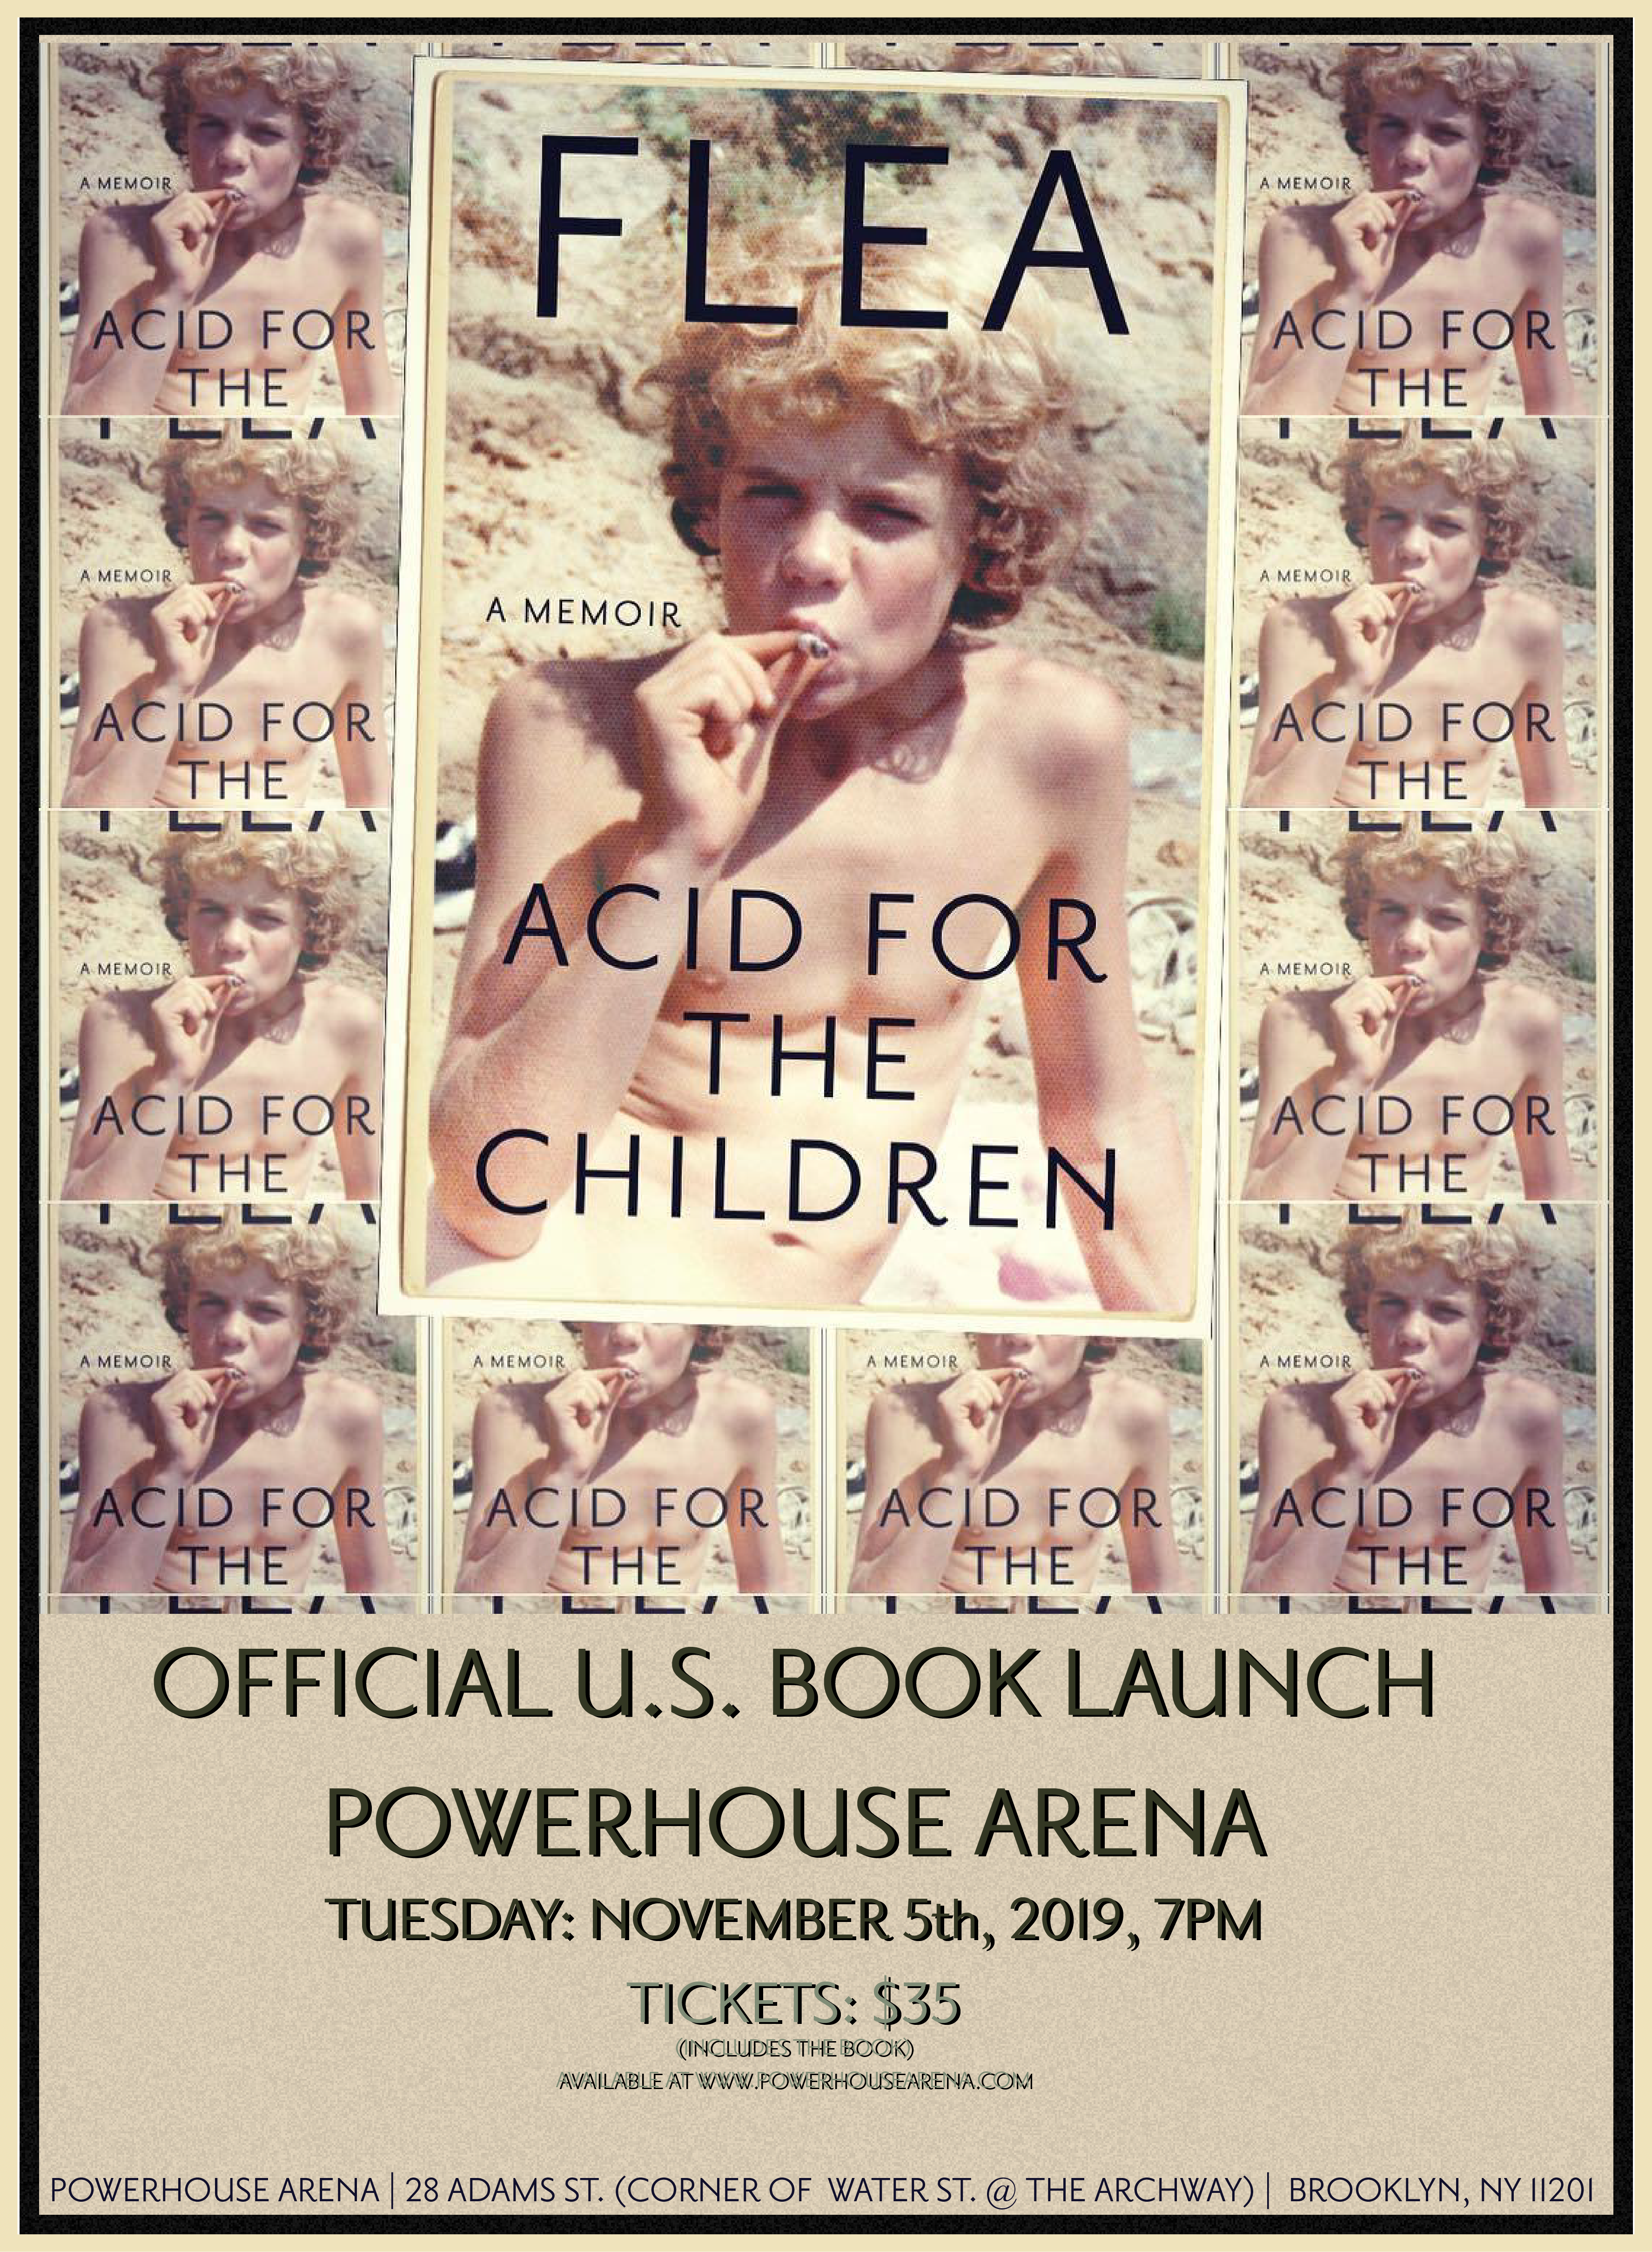 Powerhouse Arena and Rough Trade present the official U.S. book launch of Acid For The Children by Flea